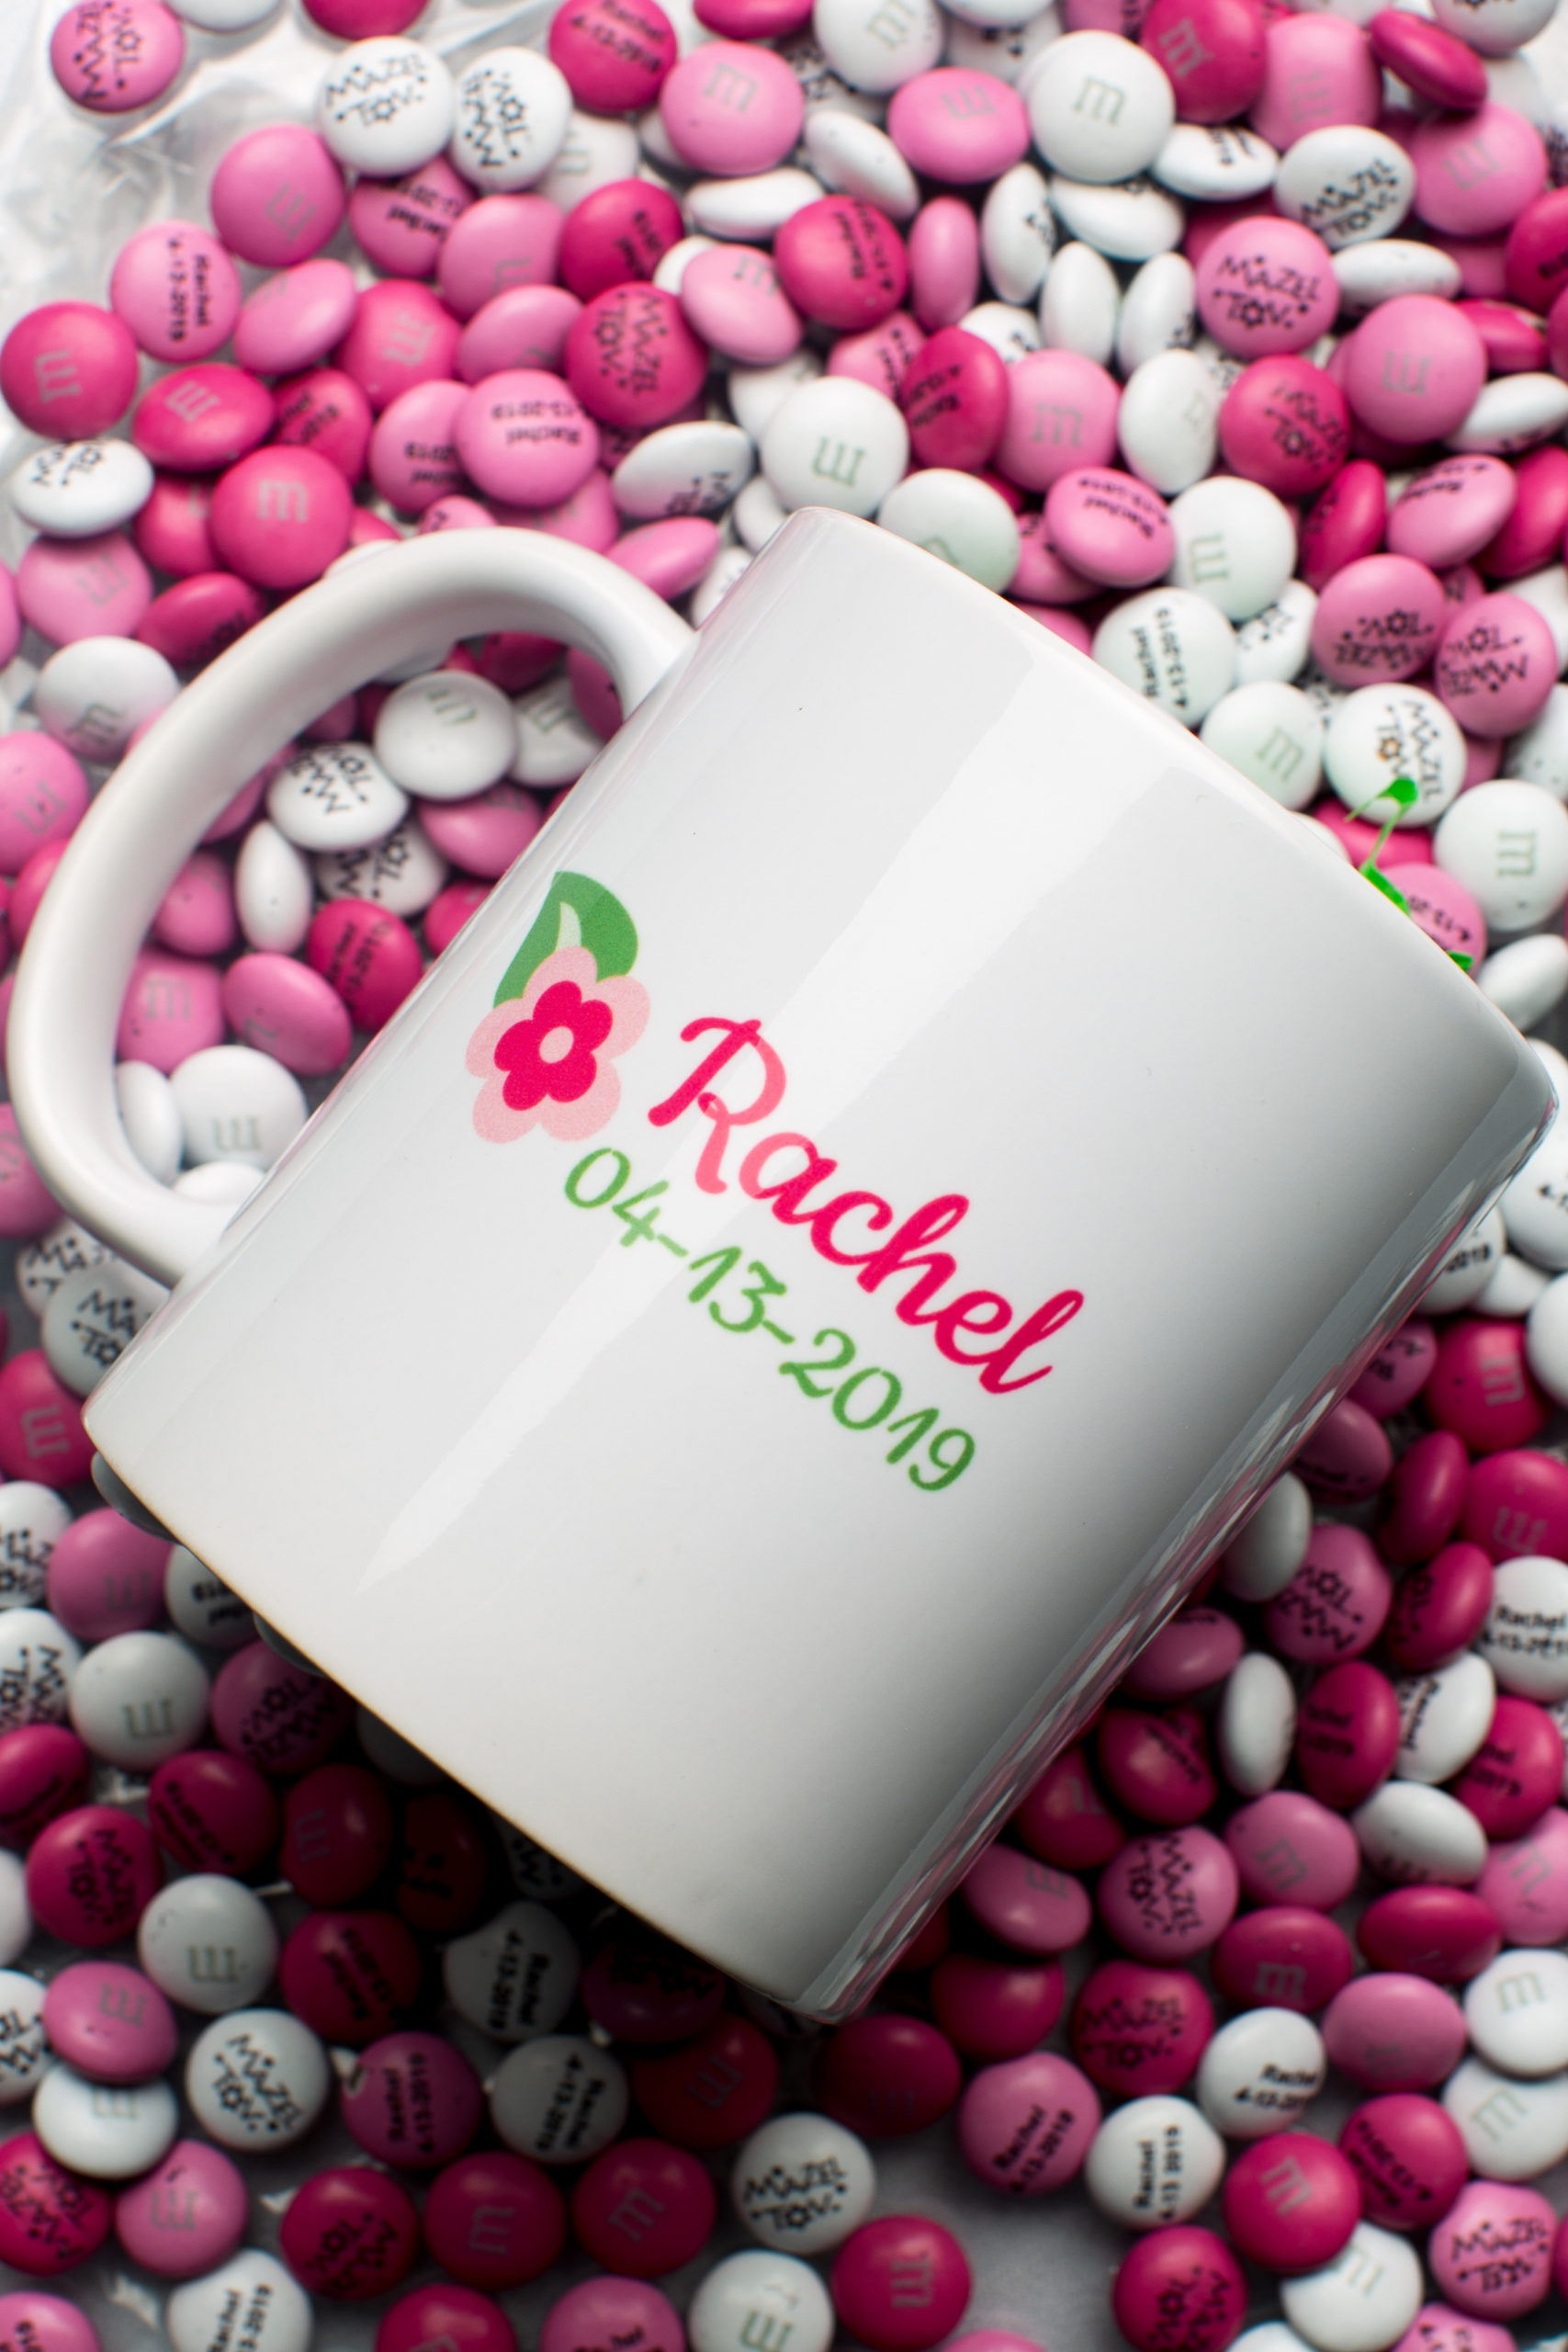 Coffee mug favors with M&Ms at Rachel's Cherry Blossom Bat Mitzvah at Agudas Achim in Alexandria, VA | Pop Color Events | Adding a Pop of Color to Bar & Bat Mitzvahs in DC, MD & VA | Photo by: Mitzvahs by Michael Temchine